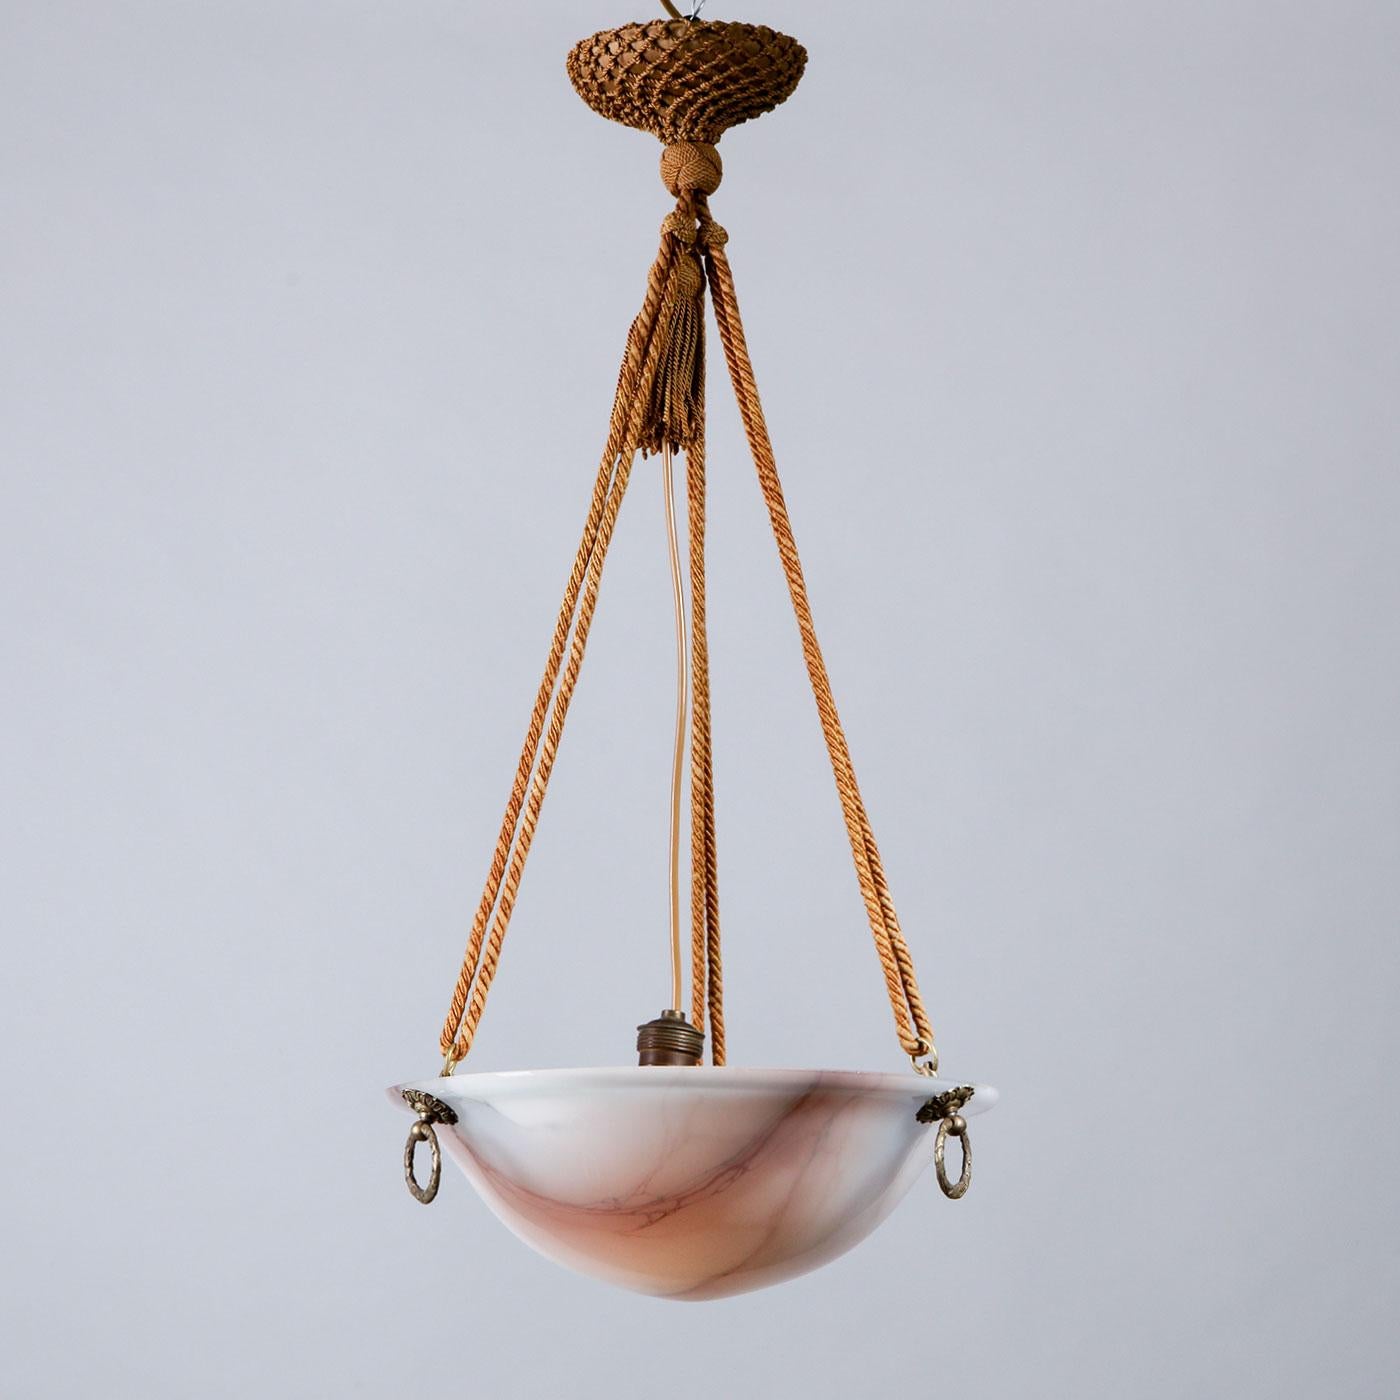 Swedish Art Deco alabaster and brass pendant lamp, Sweden, 1930s. 

Originating from early 20th-century Sweden, this sleek pendant ceiling lamp combines Art Deco design with Swedish craftsmanship for a truly unique piece. This lamp is made of warm,